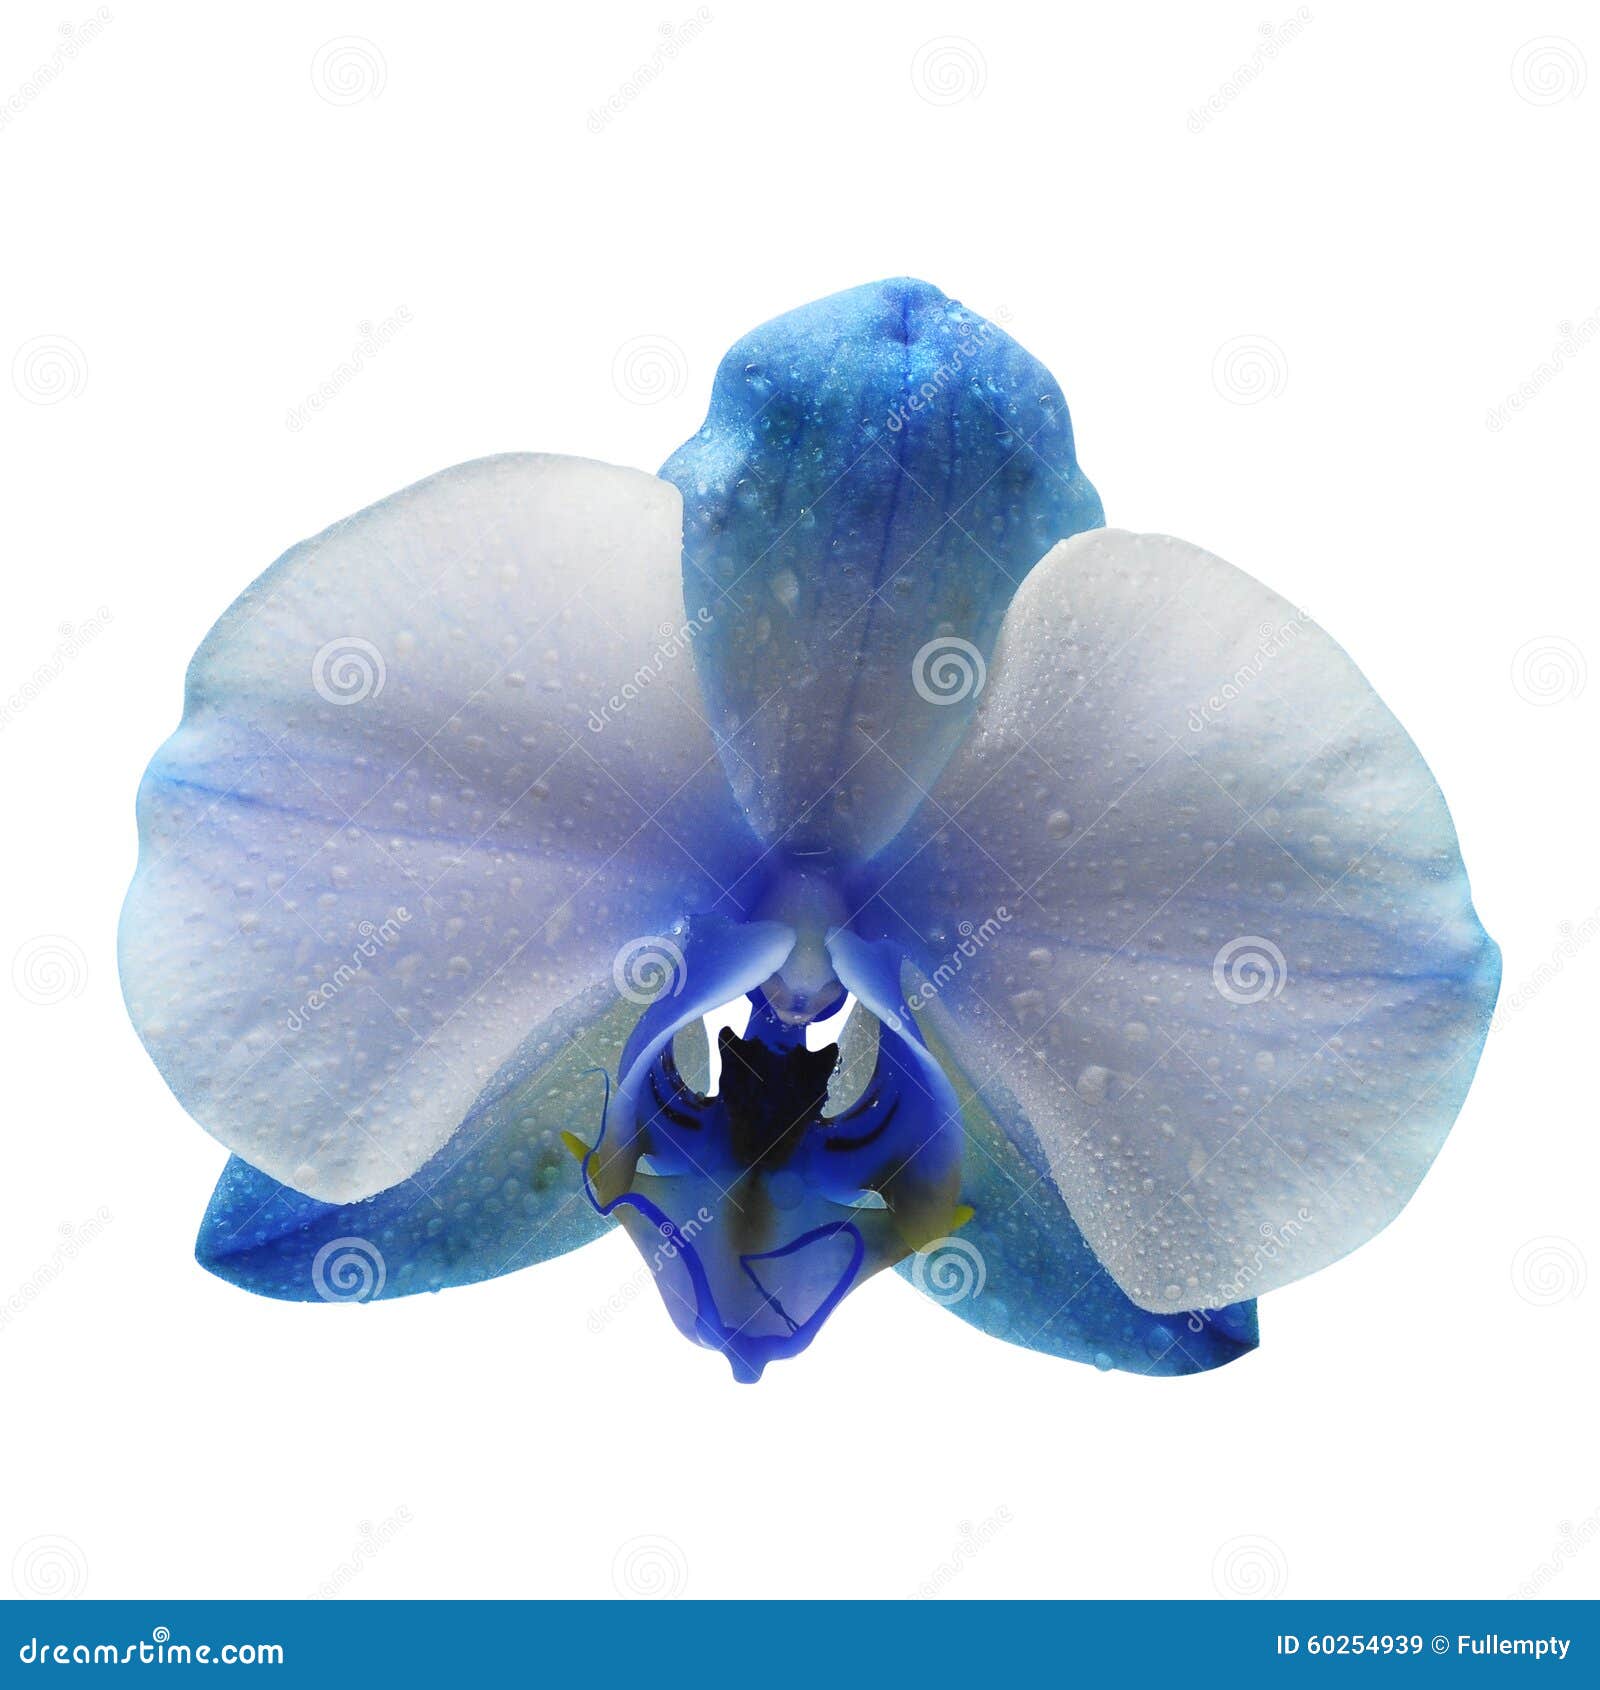 Blue Flower Orchid Isolated On White Background Stock Image - Image of